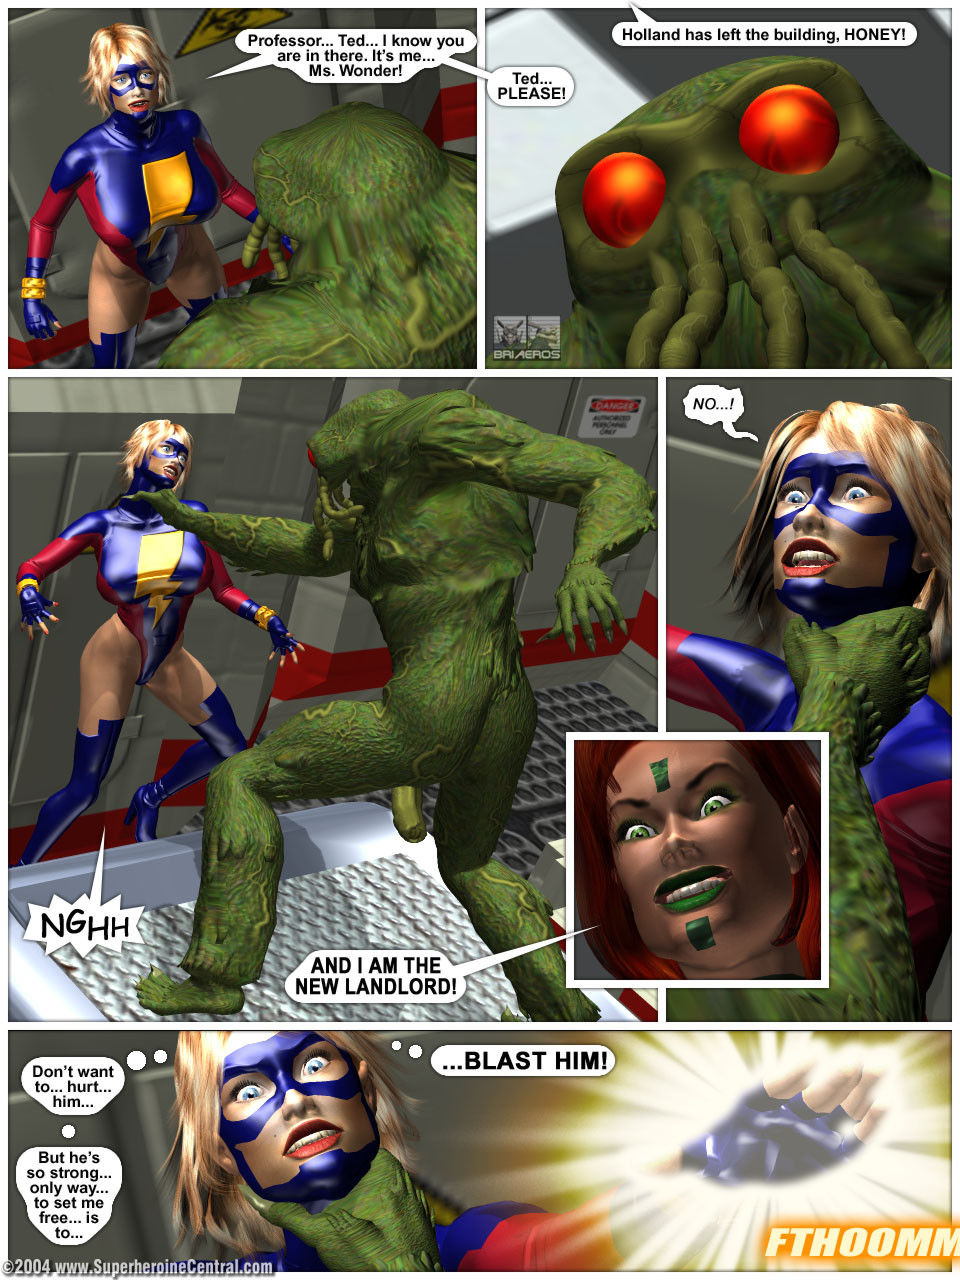 Tall To Arouse - Inside a Green Hell - Superheroinecentral page 13